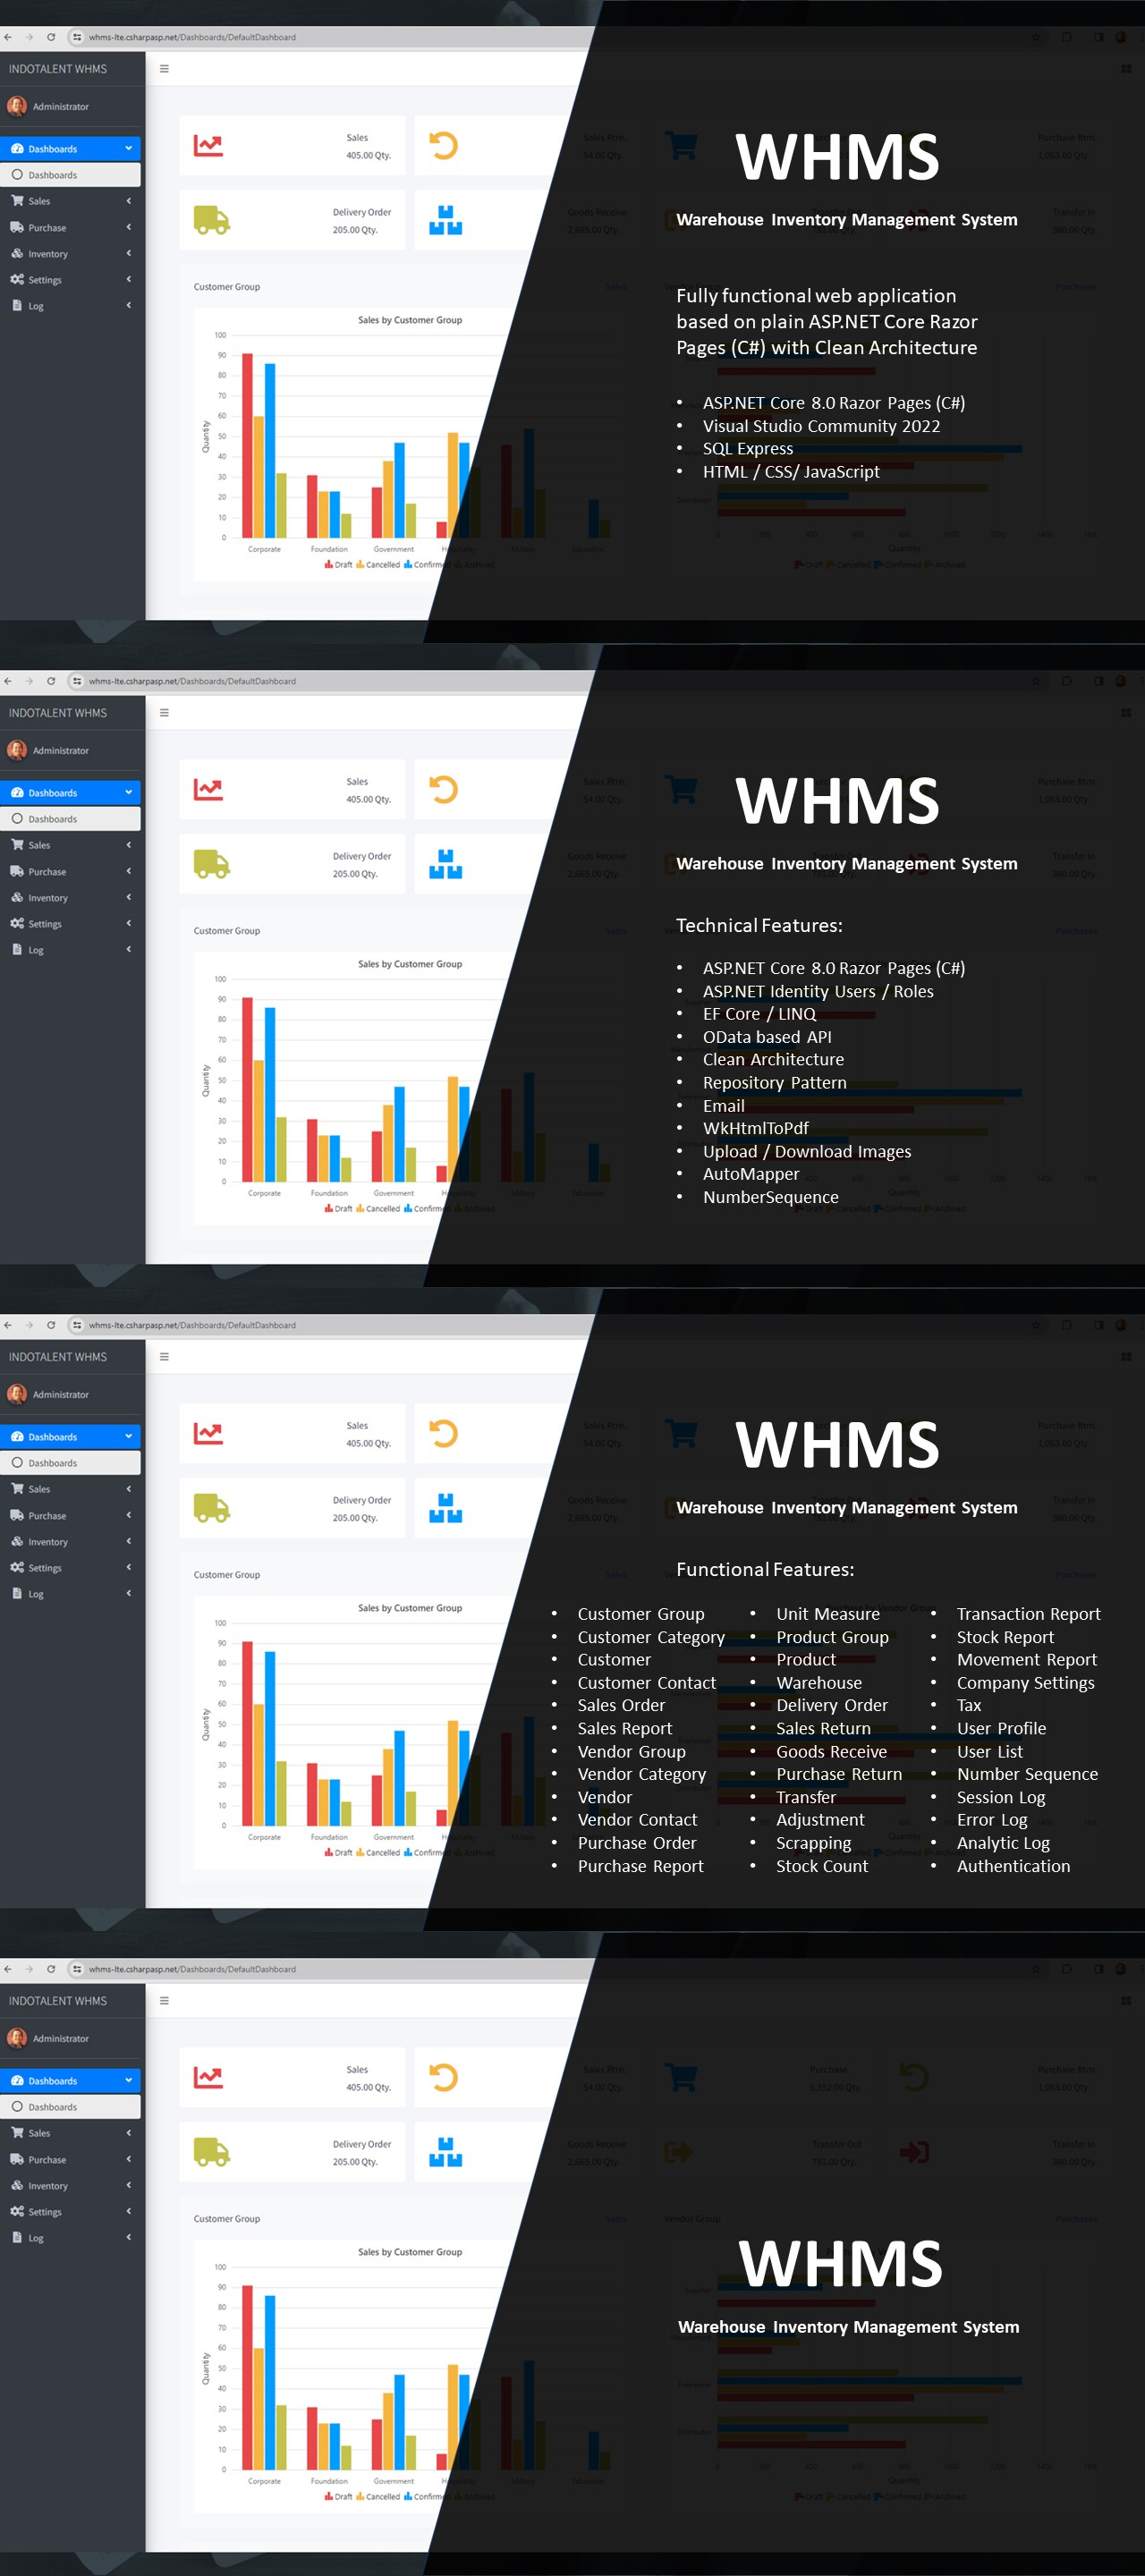 whms warehouse inventory management system